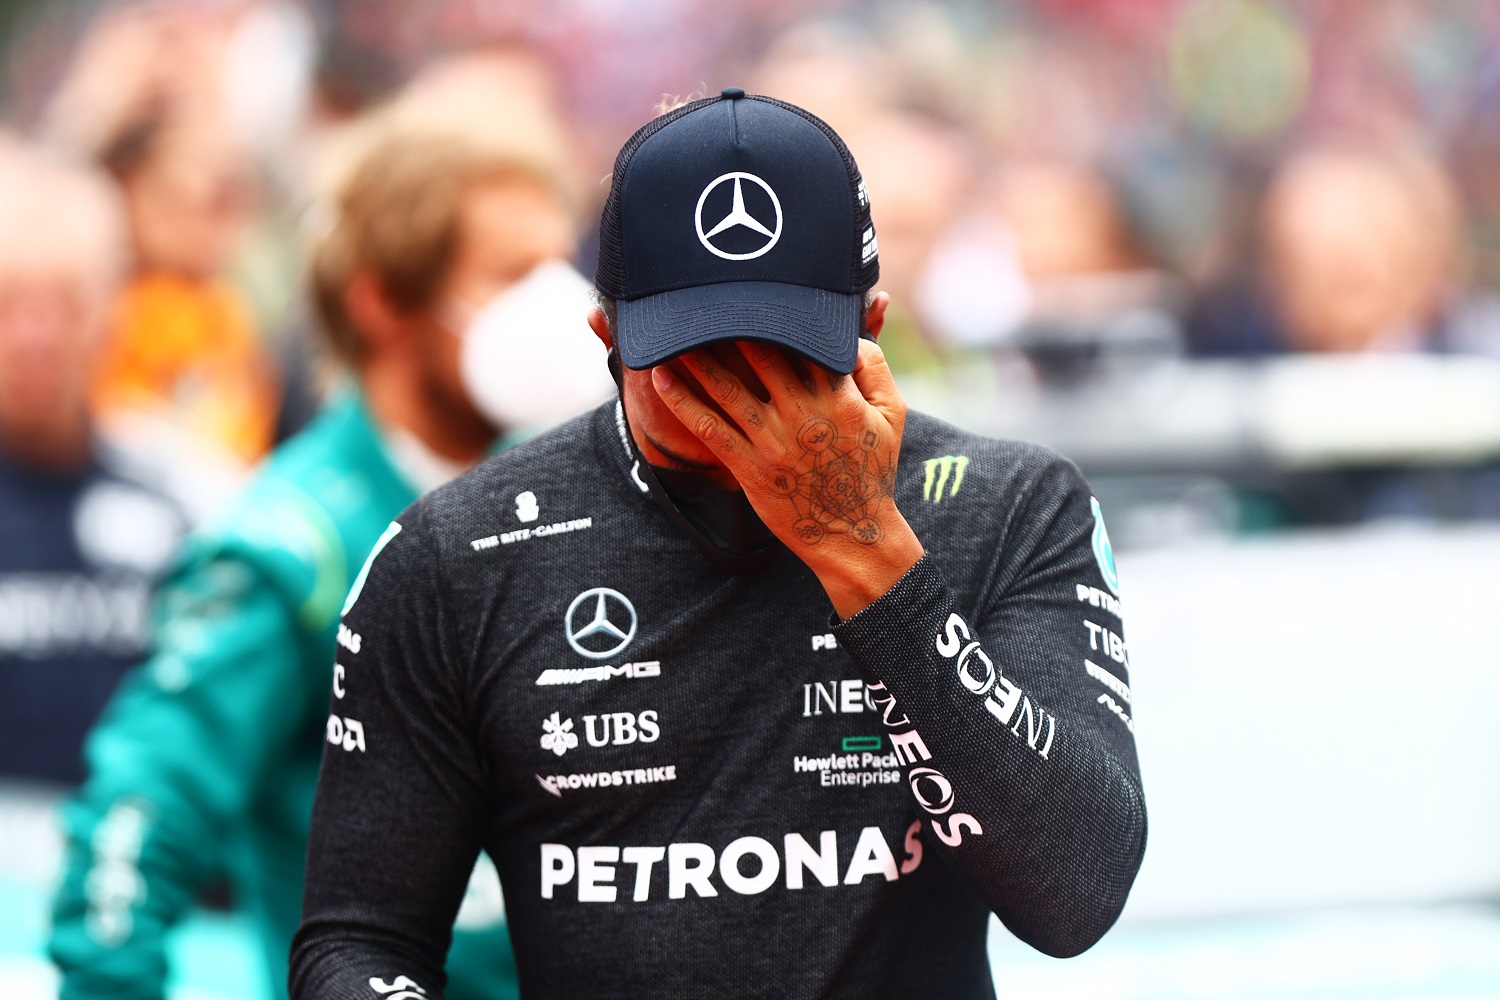 Lewis Hamilton Must Deal With a Bitter Indignity at Imola That Will Define His Season